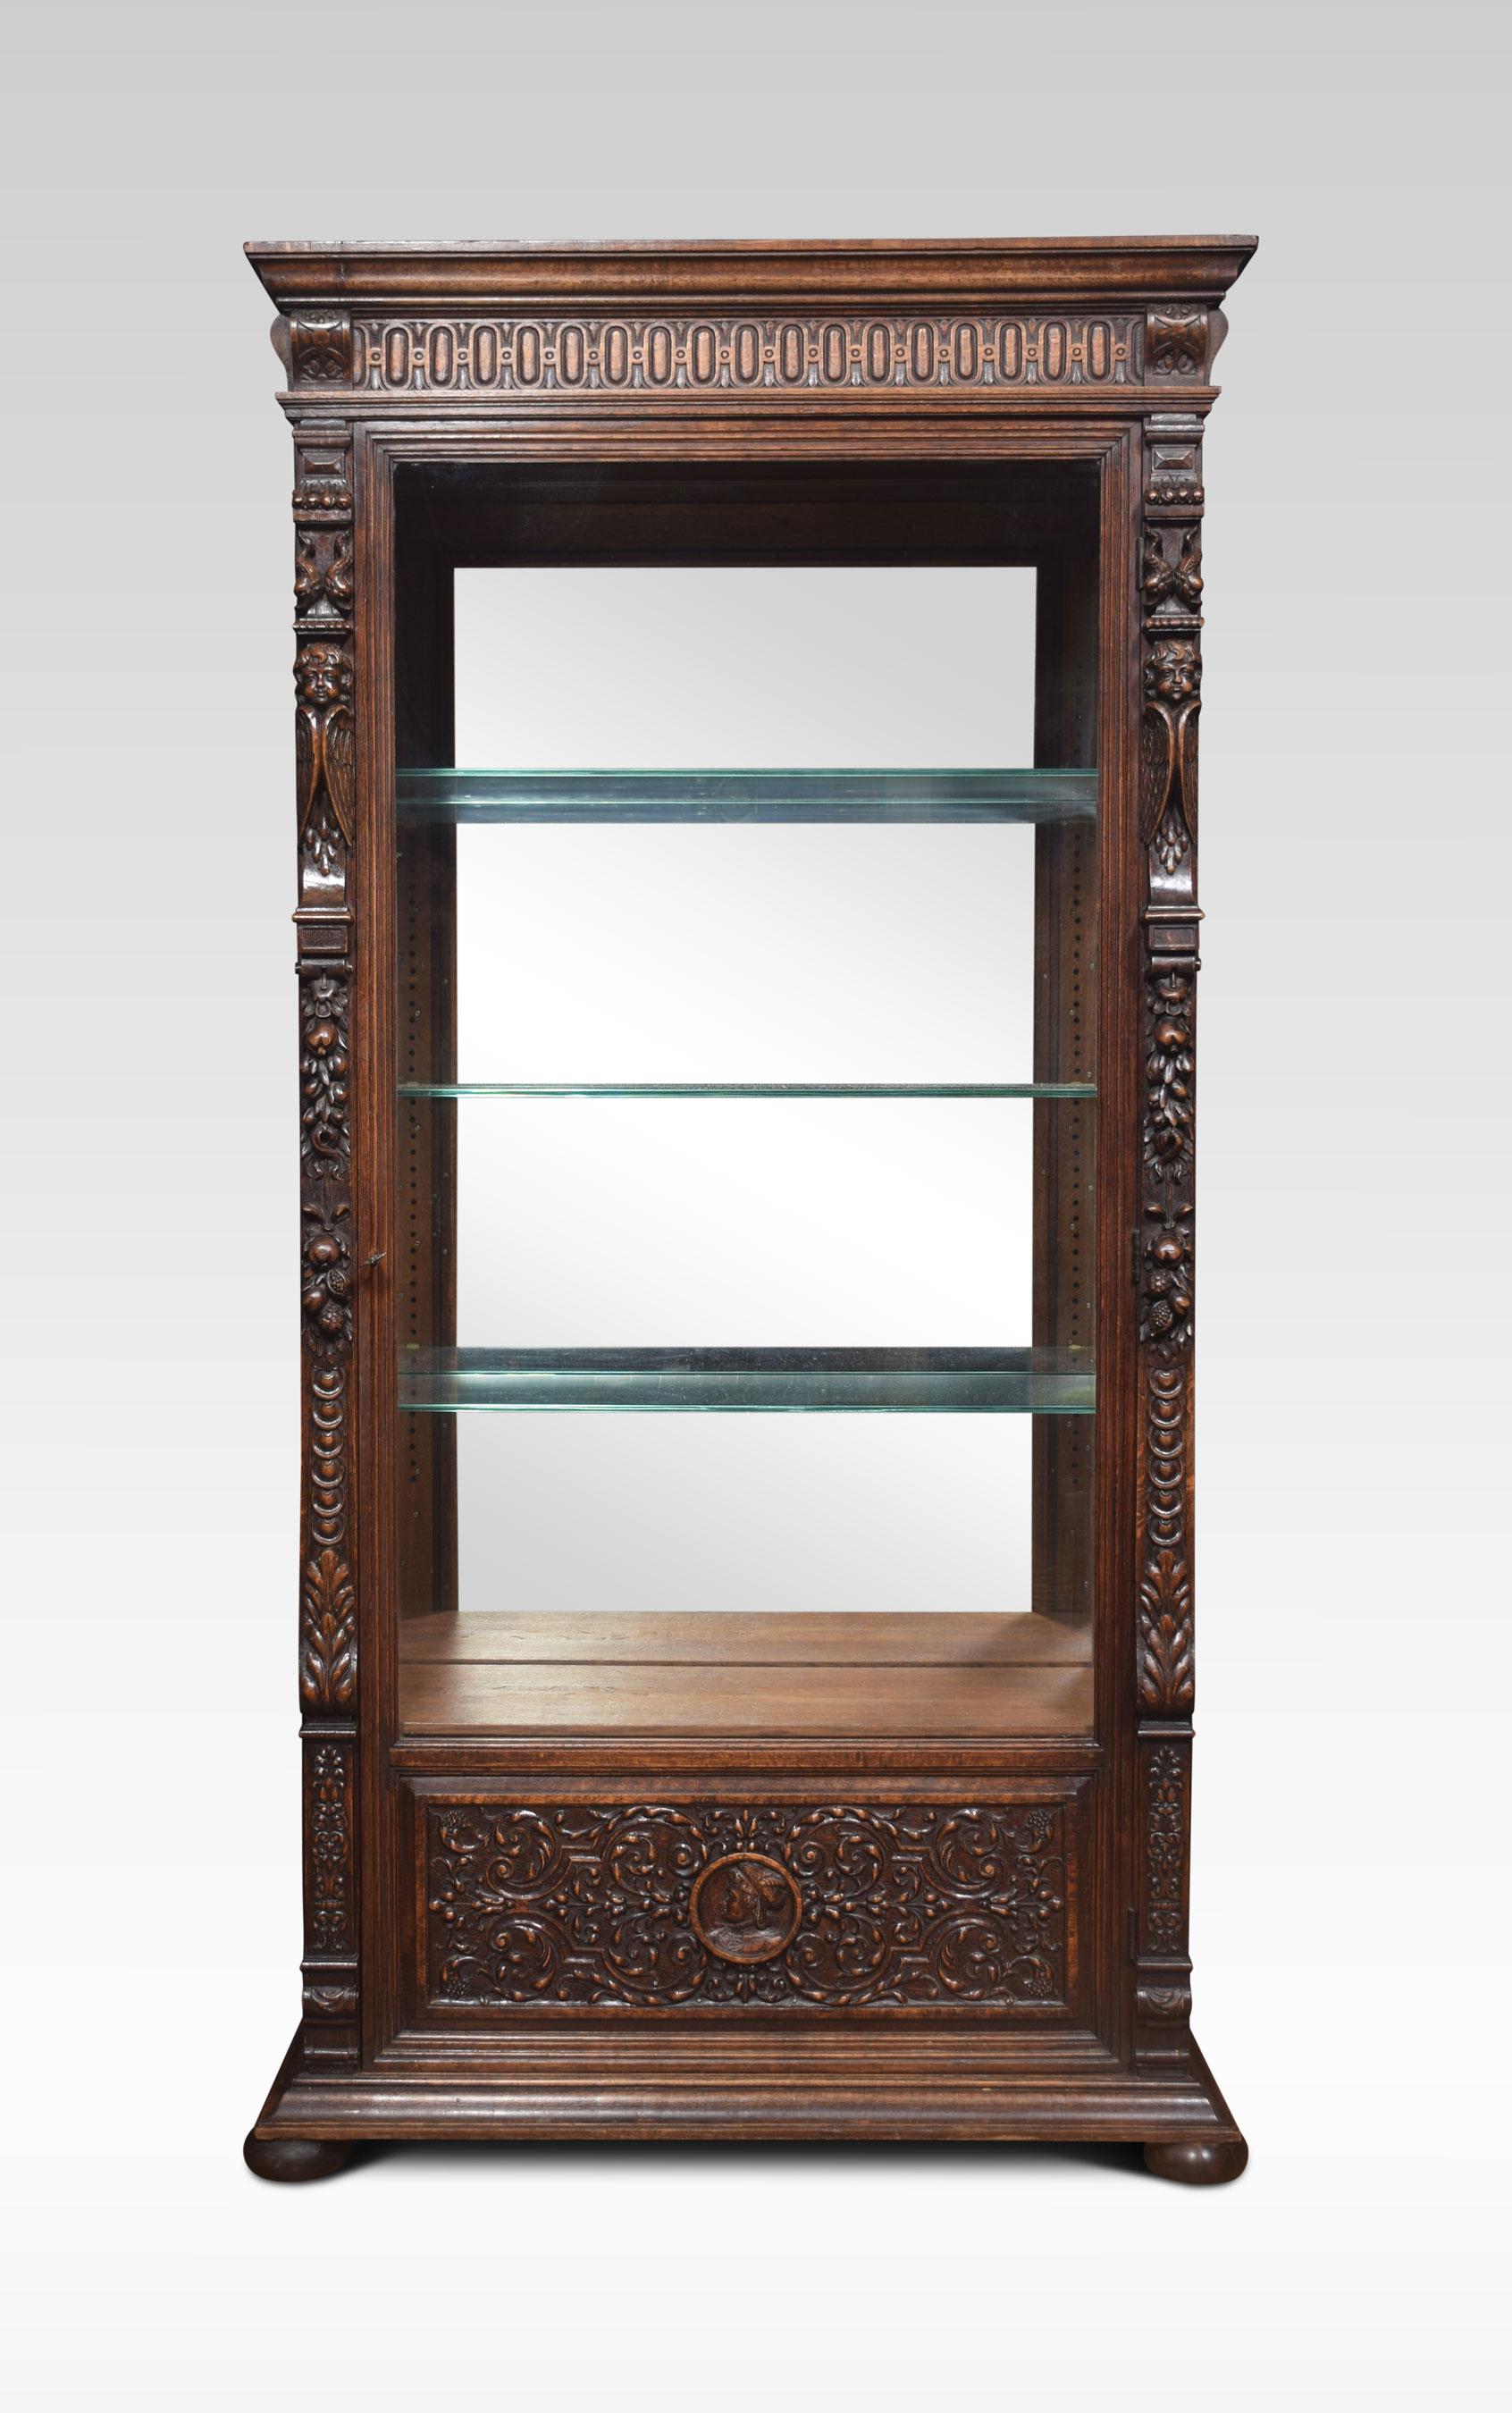 Oak display cabinet the projecting molded cornice above a large glazed door encased in carved frame with winged cherubs leaves and floral scroll relife. The door opening to reveal an adjustable shelved interior and mirrored back. All raised up on